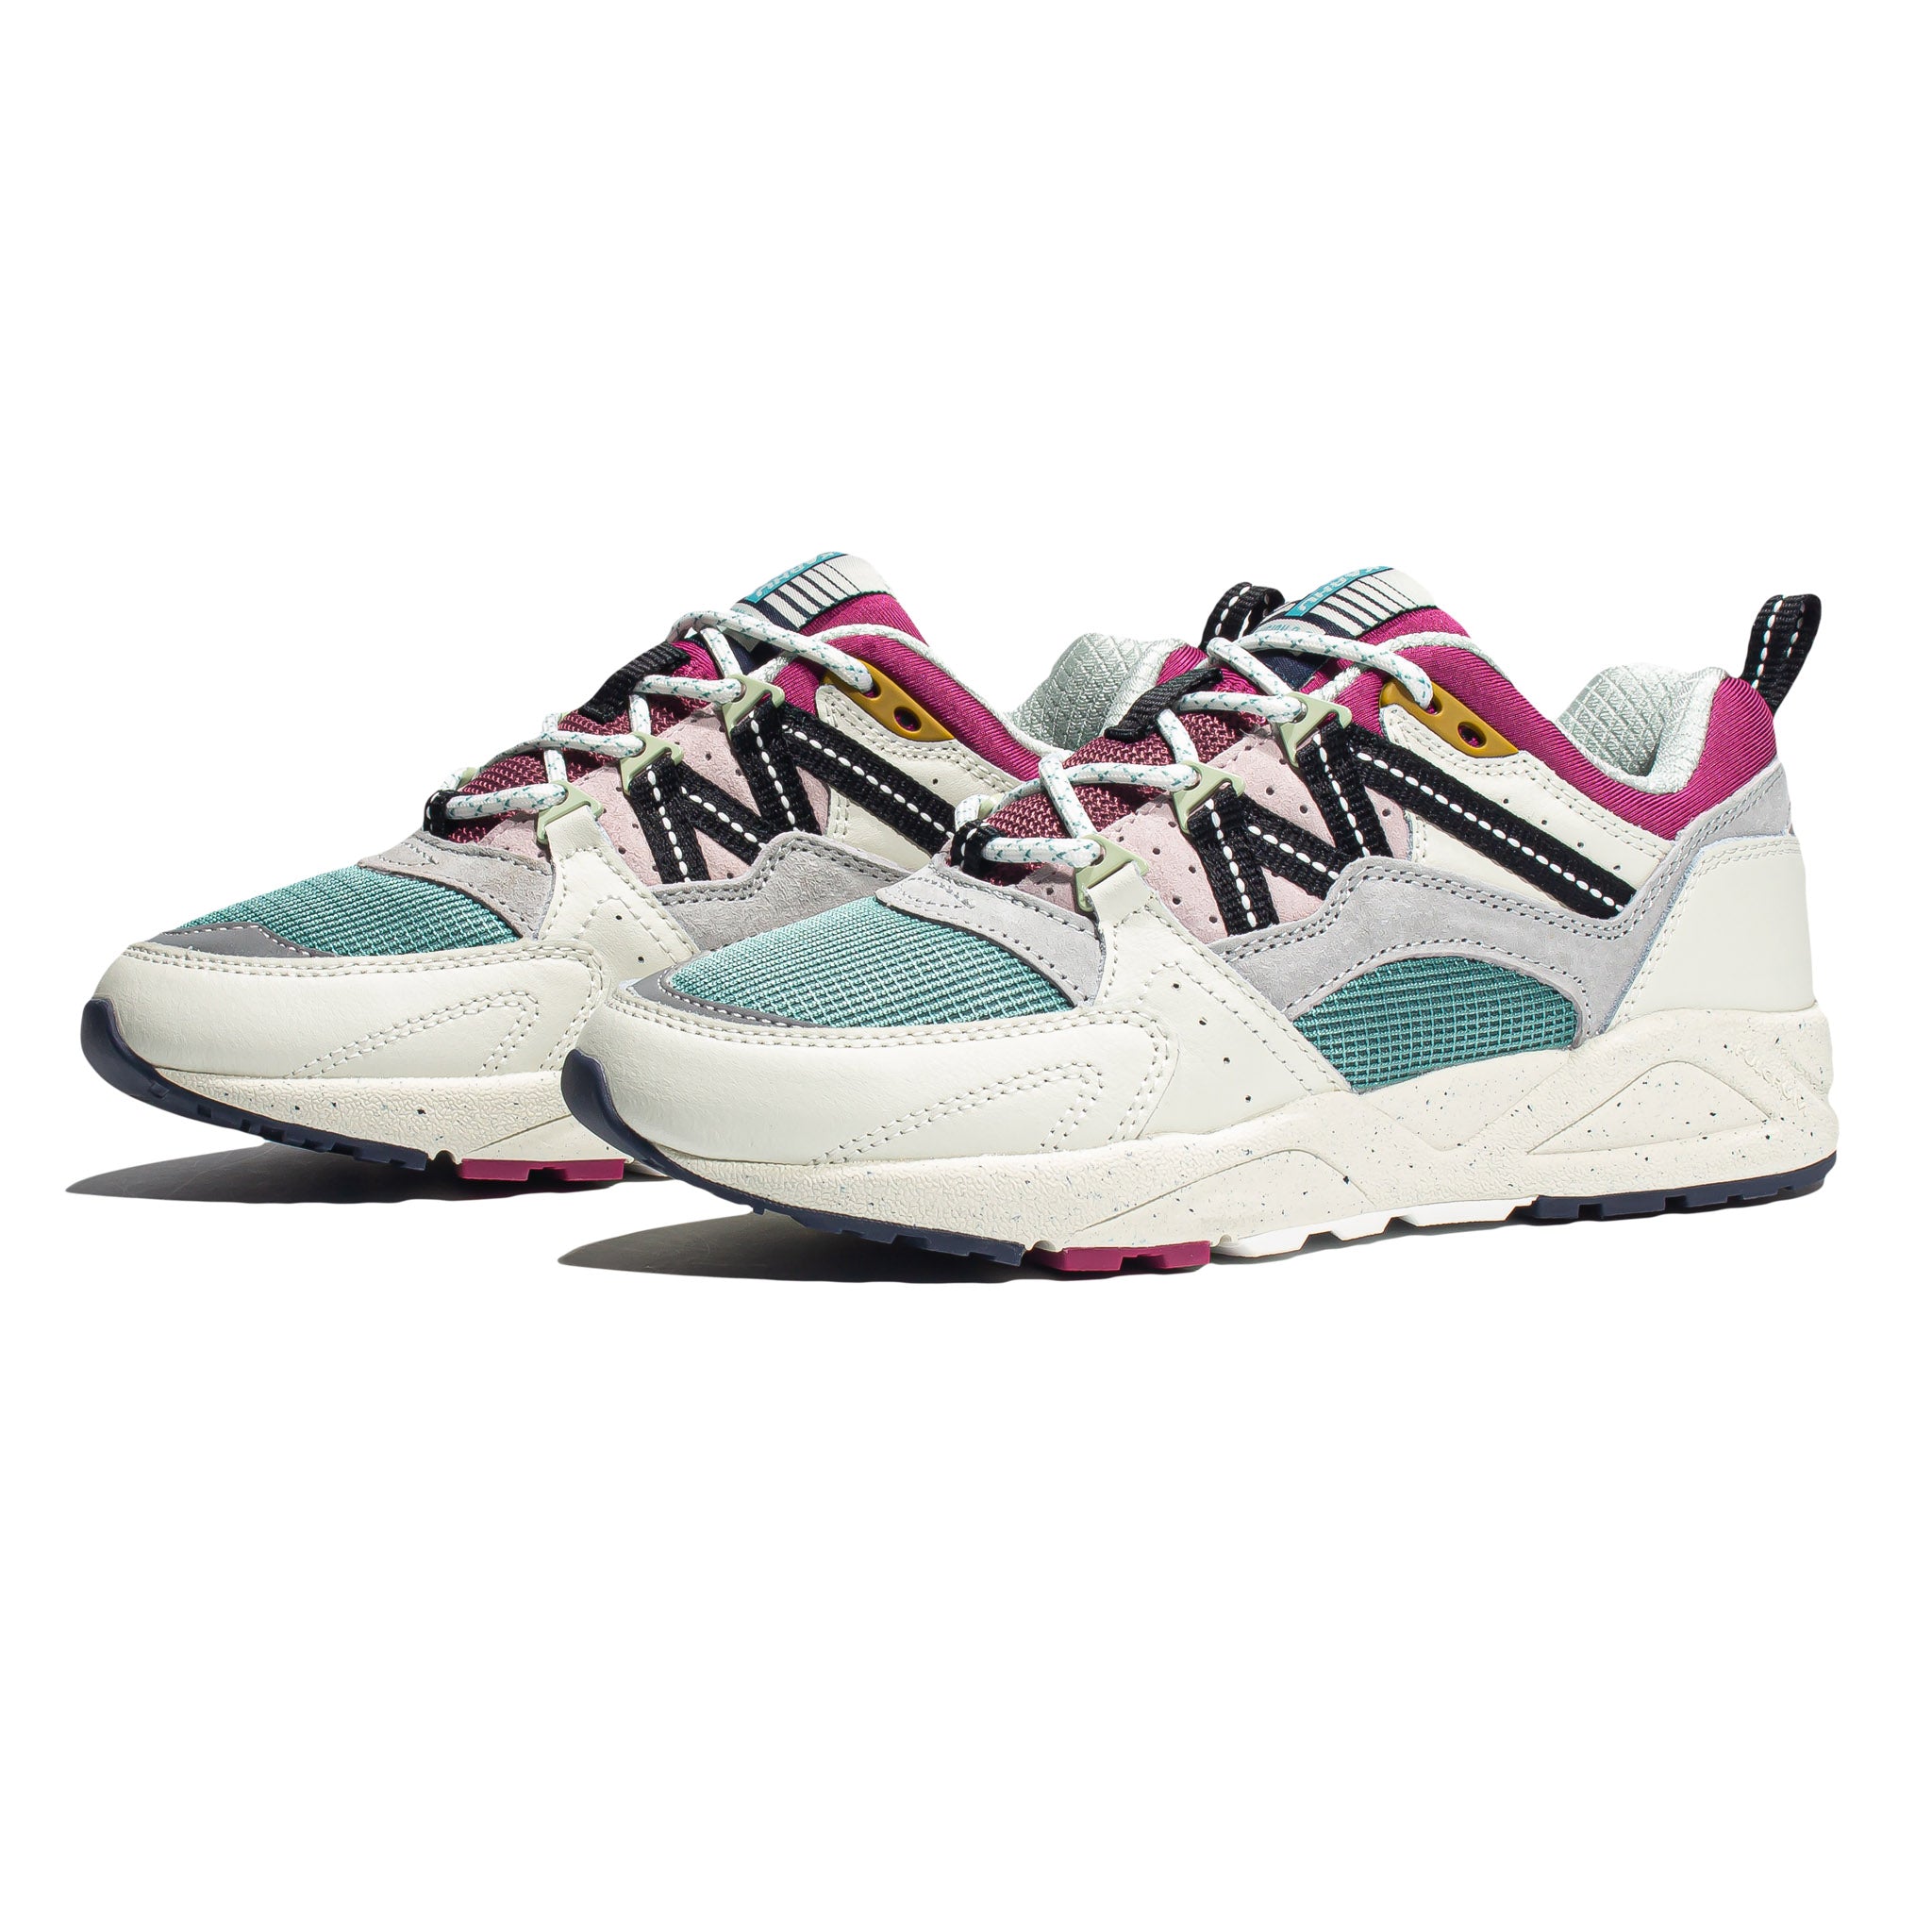 Karhu Fusion 2.0 'Colour of Mood Pack' Lily White